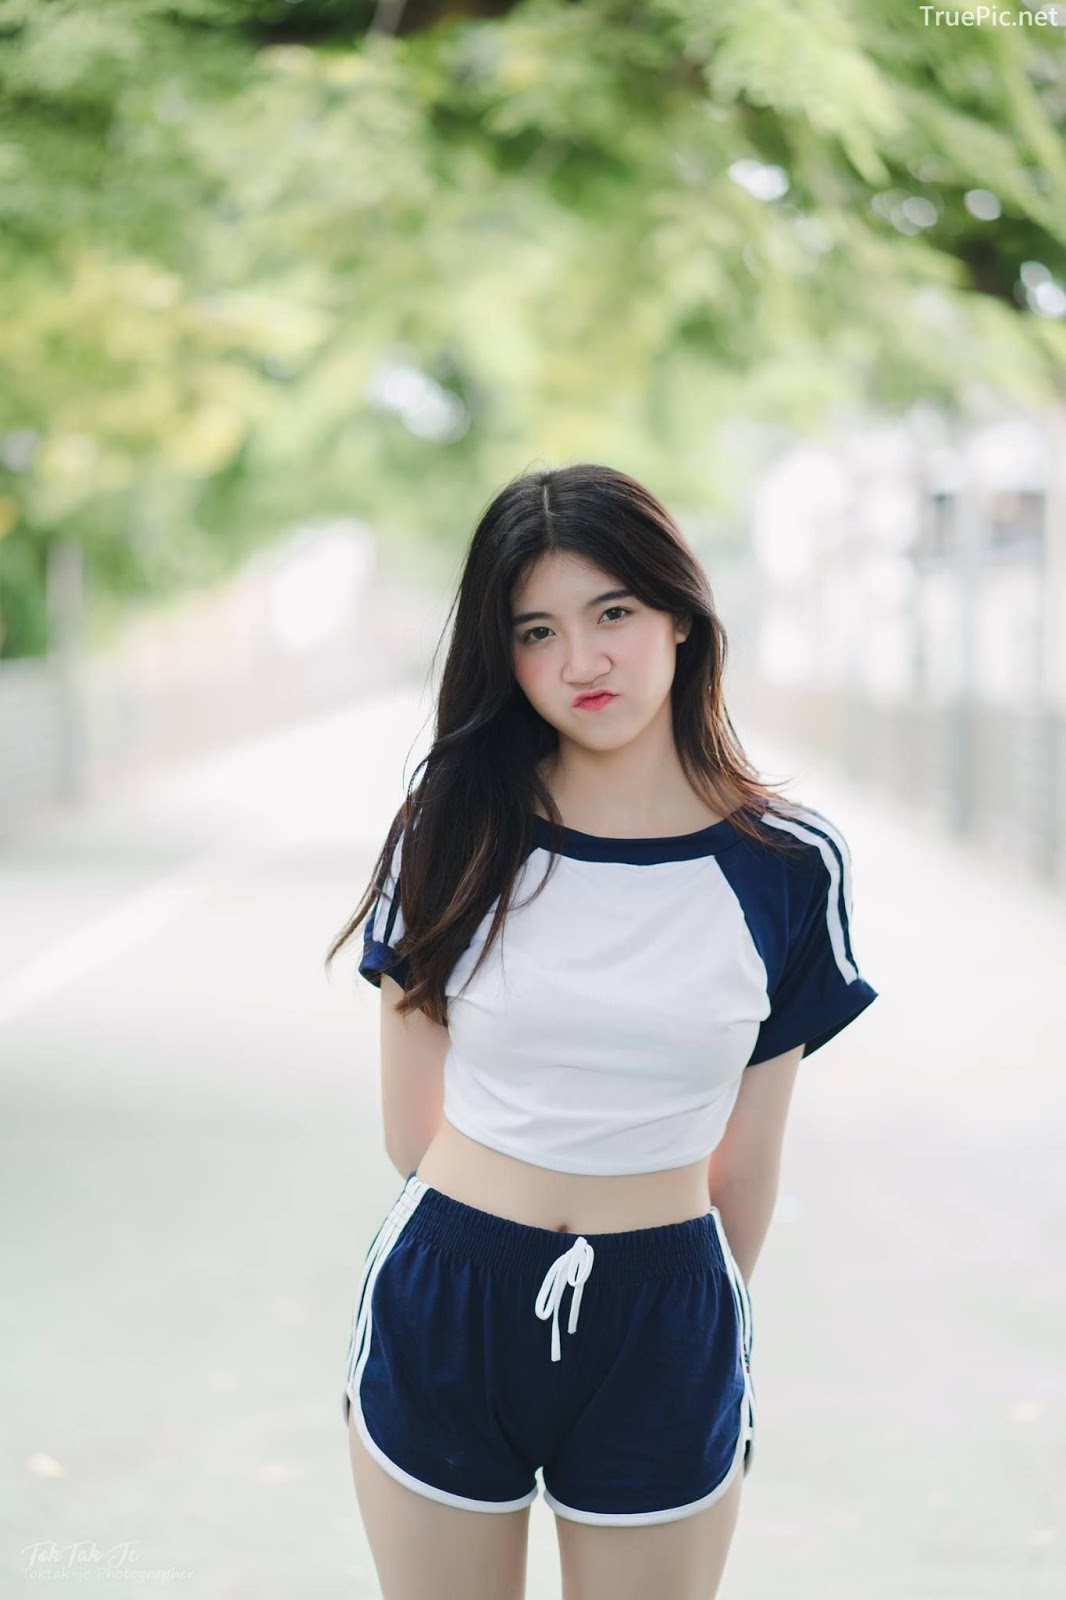 Hot Girl Thailand - Sasi Ngiunwan - Scenes From an Empty City - TruePic.net - Picture 20